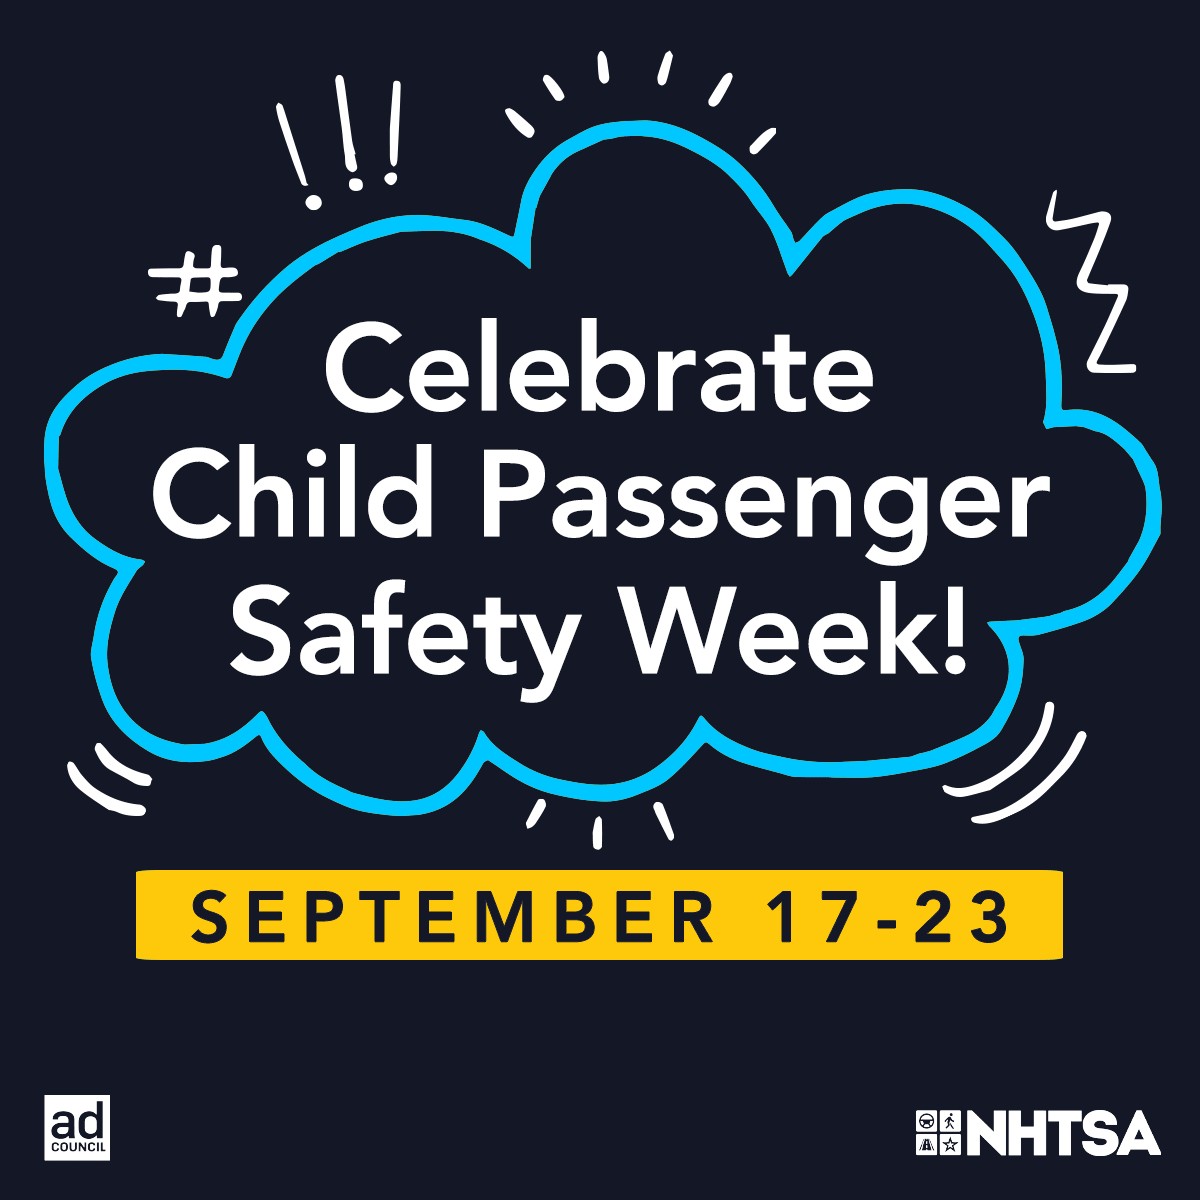 Child Passenger Safety Week is the perfect time to make sure your child is in the right seat and that it’s installed correctly. Visit NHTSA.gov/TheRightSeat for tips to keep your child as safe as possible in the car. #ChildPassengerSafetyWeek #TheRightSeat